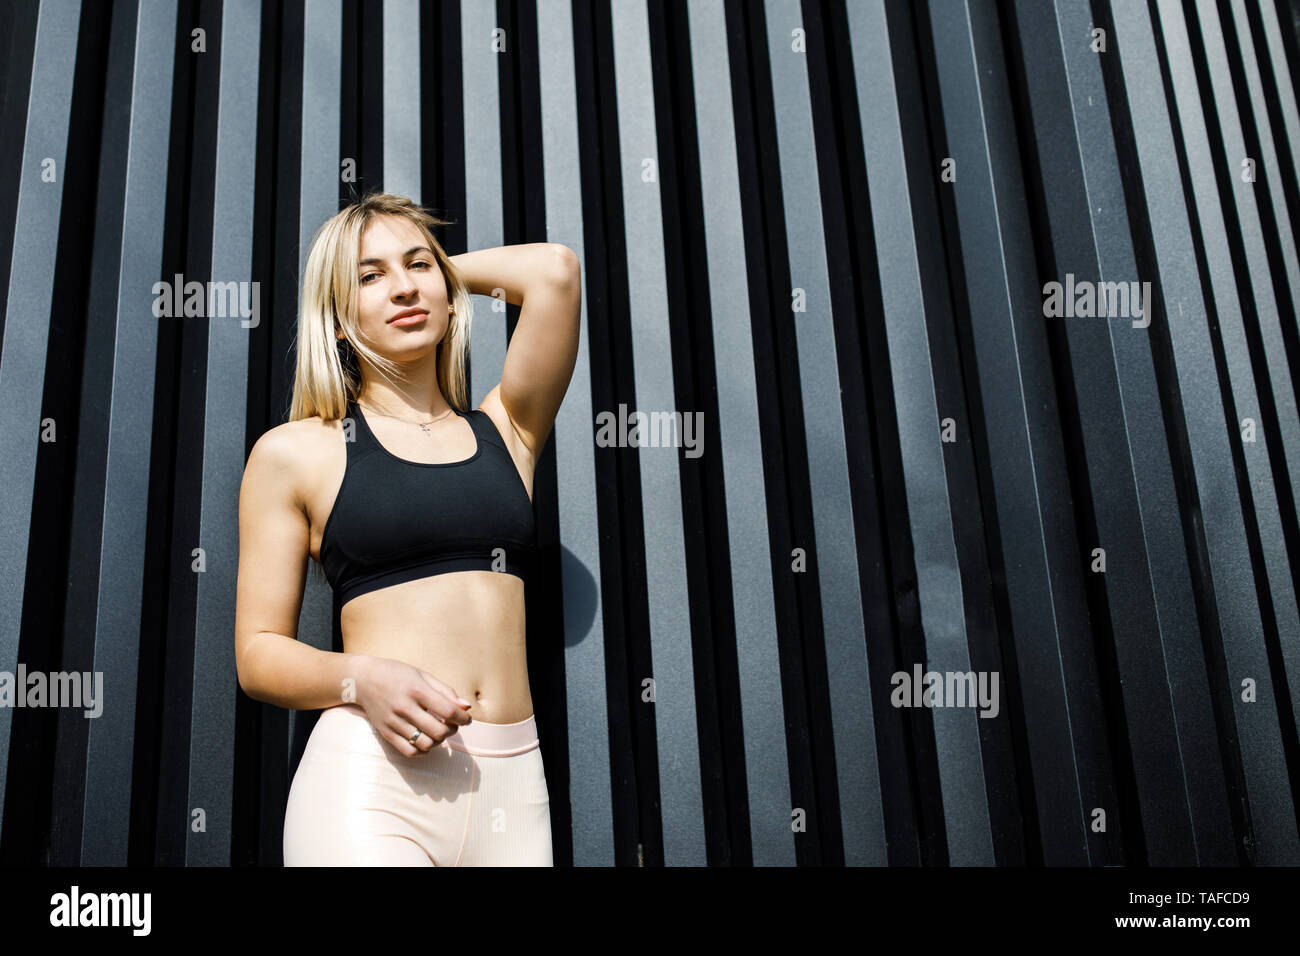 Young Blonde in Sports Bra Stock Photo by ©eugenef 95155772